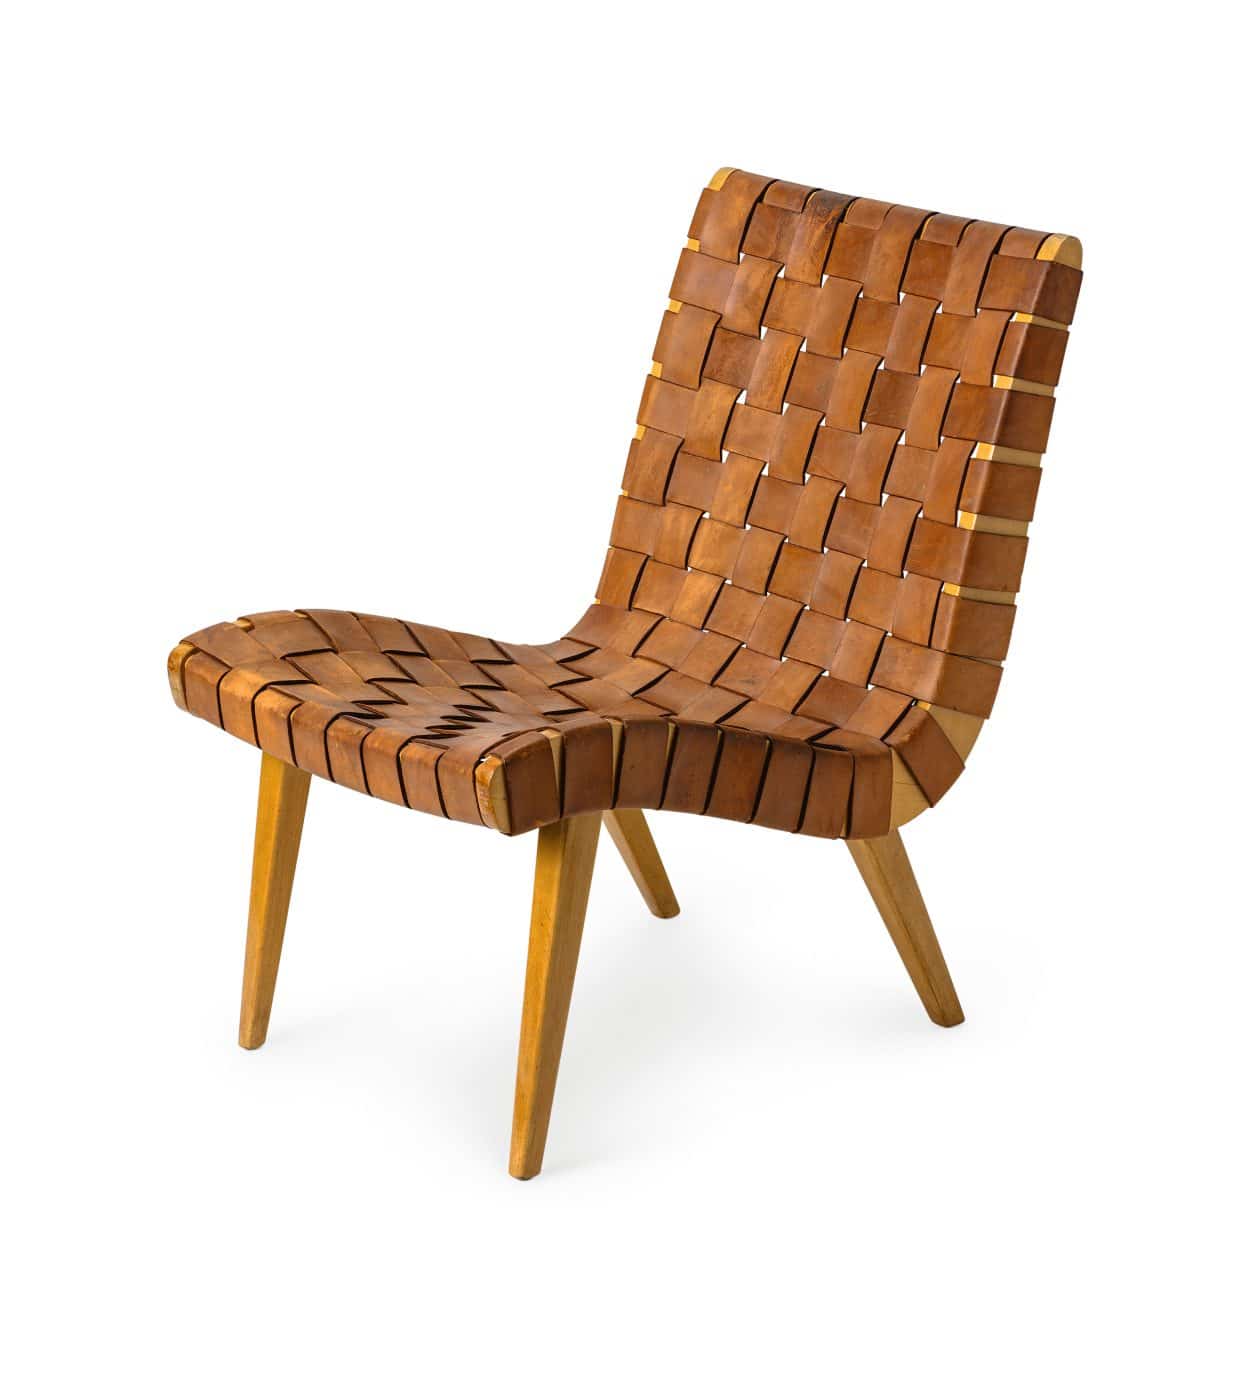 A woven-leather lounge chair by Danish-American designer JENS RISOM for Knoll